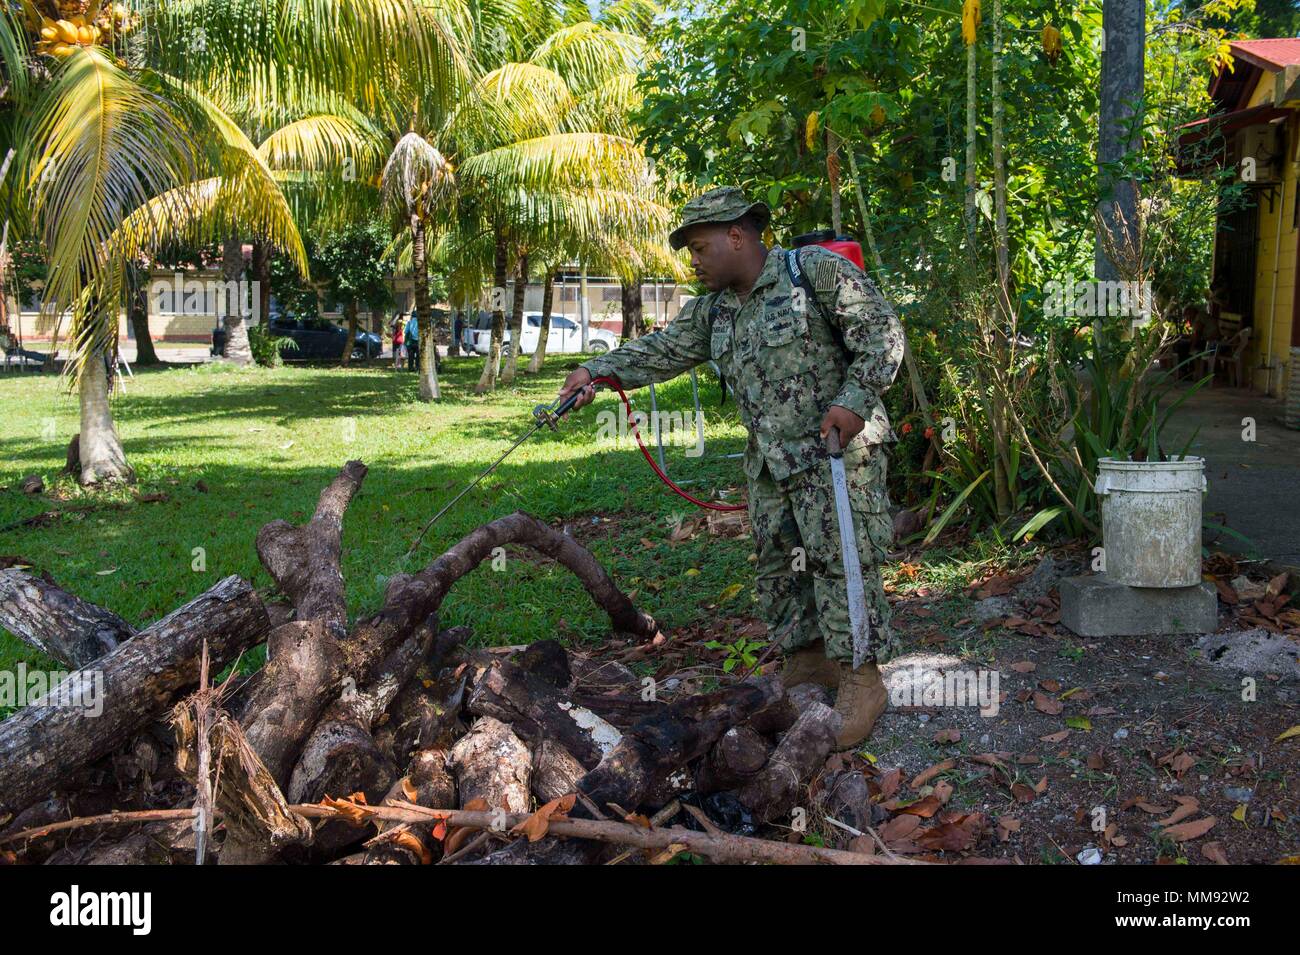 170918-N-YM856-0092 PUERTO BARRIOS, Guatemala (Sept. 18, 2017) Hospital Corpsman 1st Class Dominic Ladmirault, assigned to the Navy Entomology Center for Excellence, sprays insecticide at Centro De Atención Mis Años Dorados, a local nursing home, during Southern Partnership Station 17 (SPS 17).  SPS 17 is a U.S. Navy deployment executed by U.S. Naval Forces Southern Command/U.S. 4th Fleet, focused on subject matter expert exchanges with partner nation militaries and security forces in Central and South America. (U.S. Navy Combat Camera photo by Mass Communication Specialist 2nd Class Brittney  Stock Photo